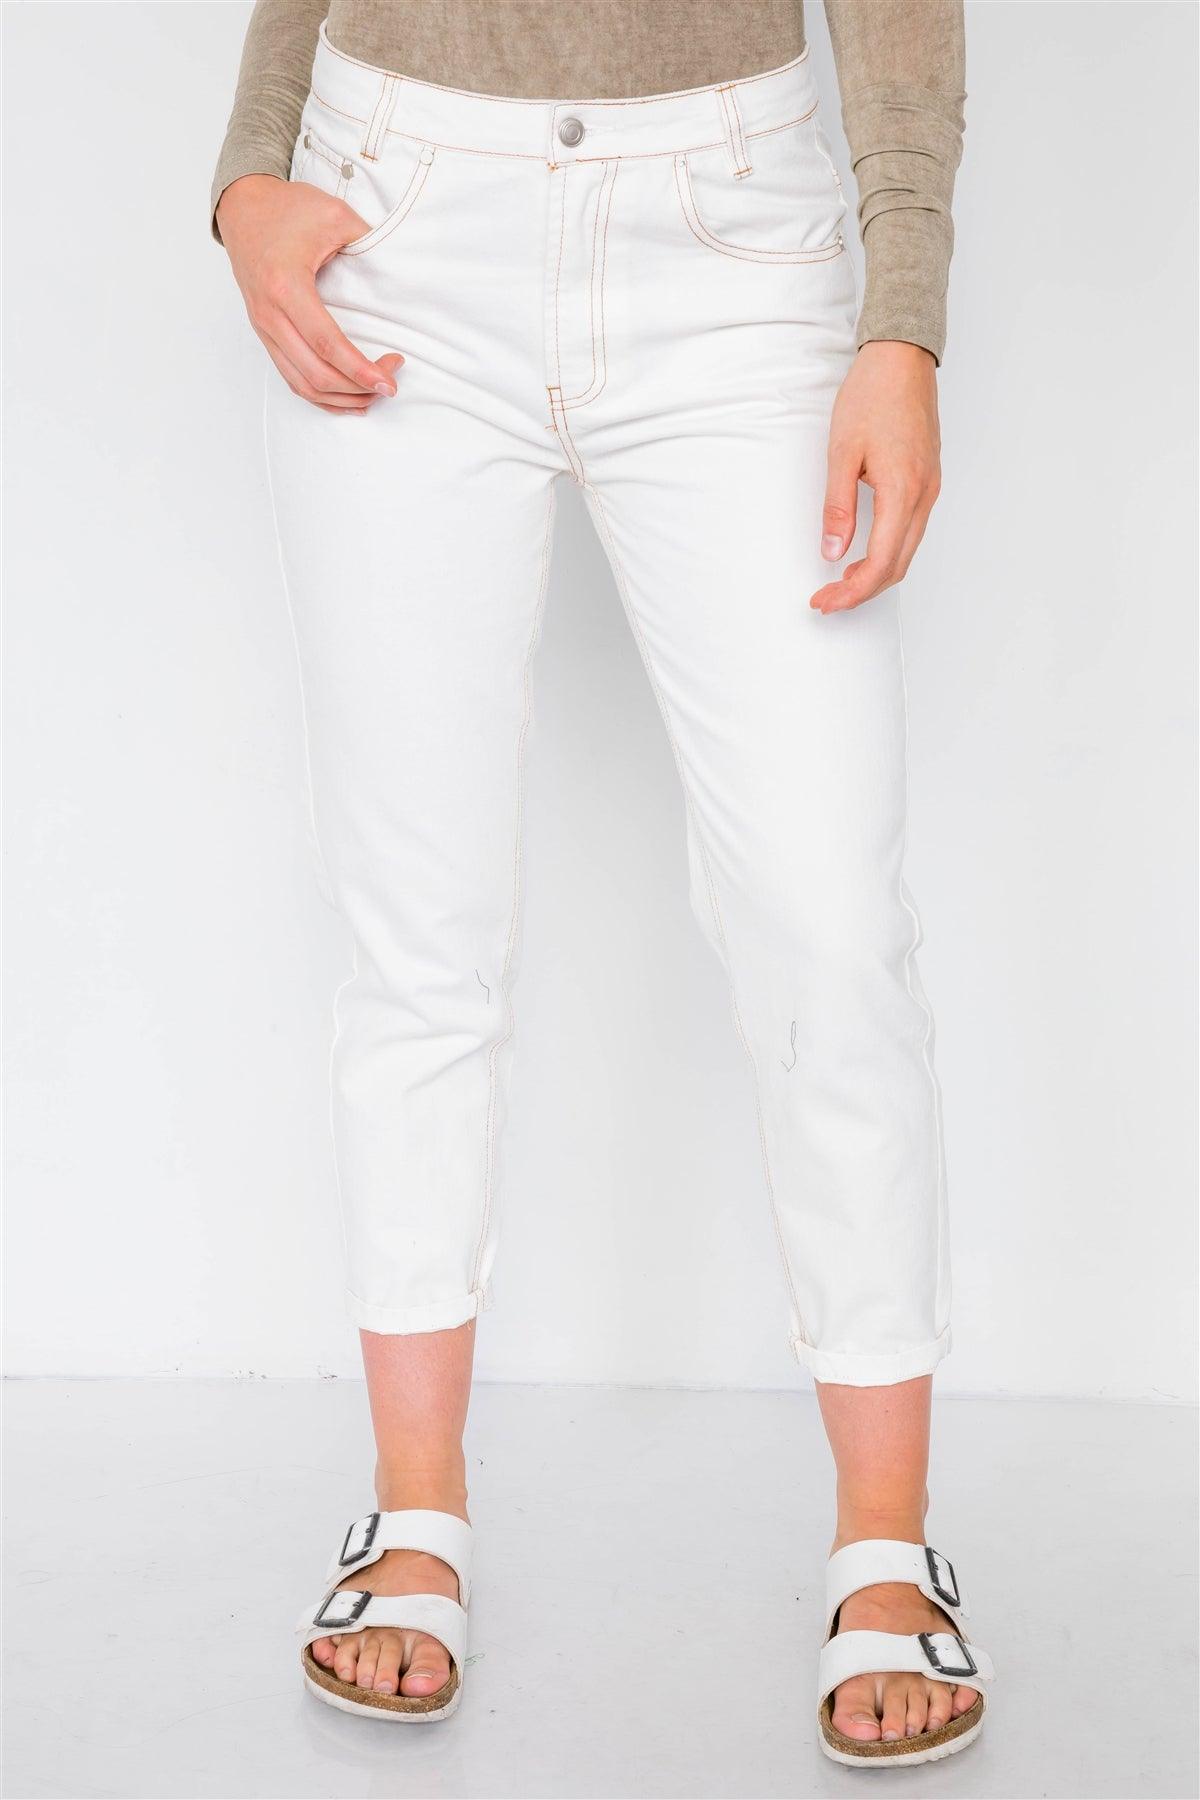 Off White Jeans With Brown Stitching  /2-2-1